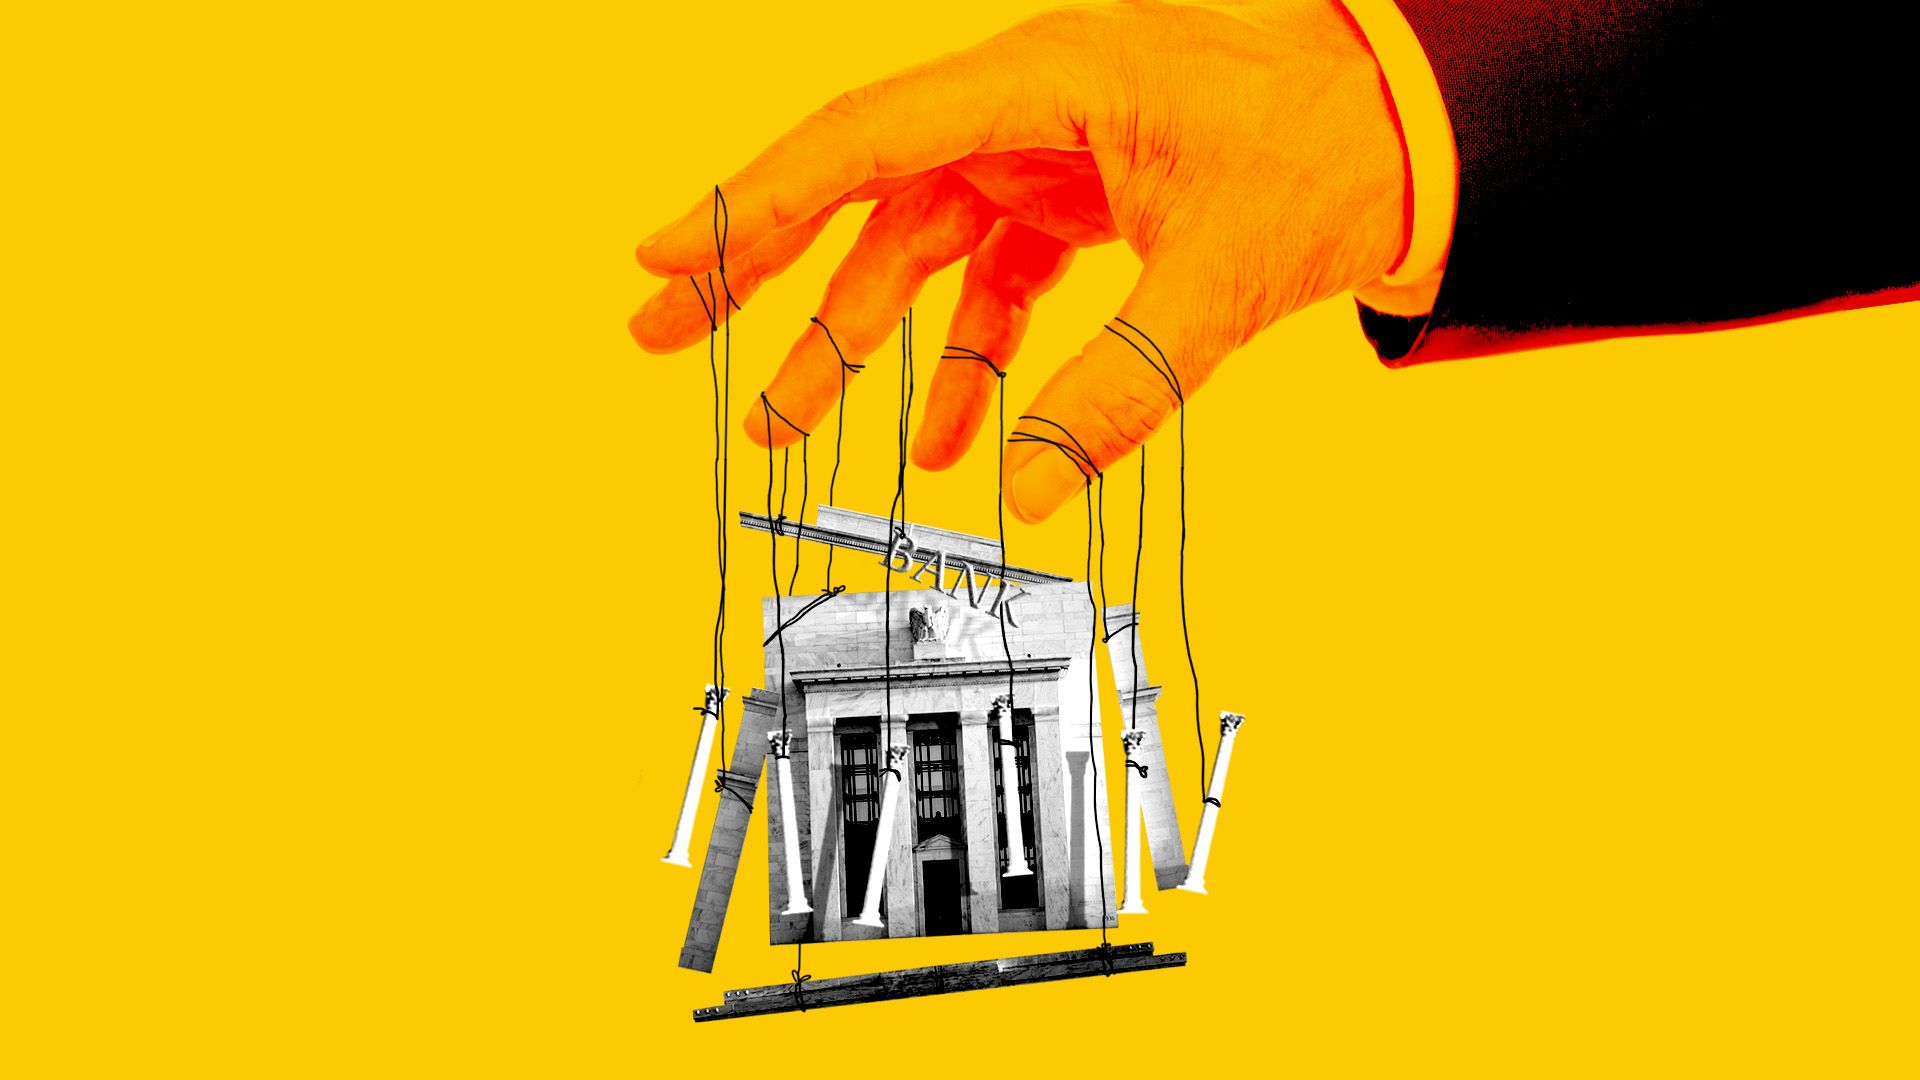 Illustration of a giant hand in a business suit holding a marionette bank